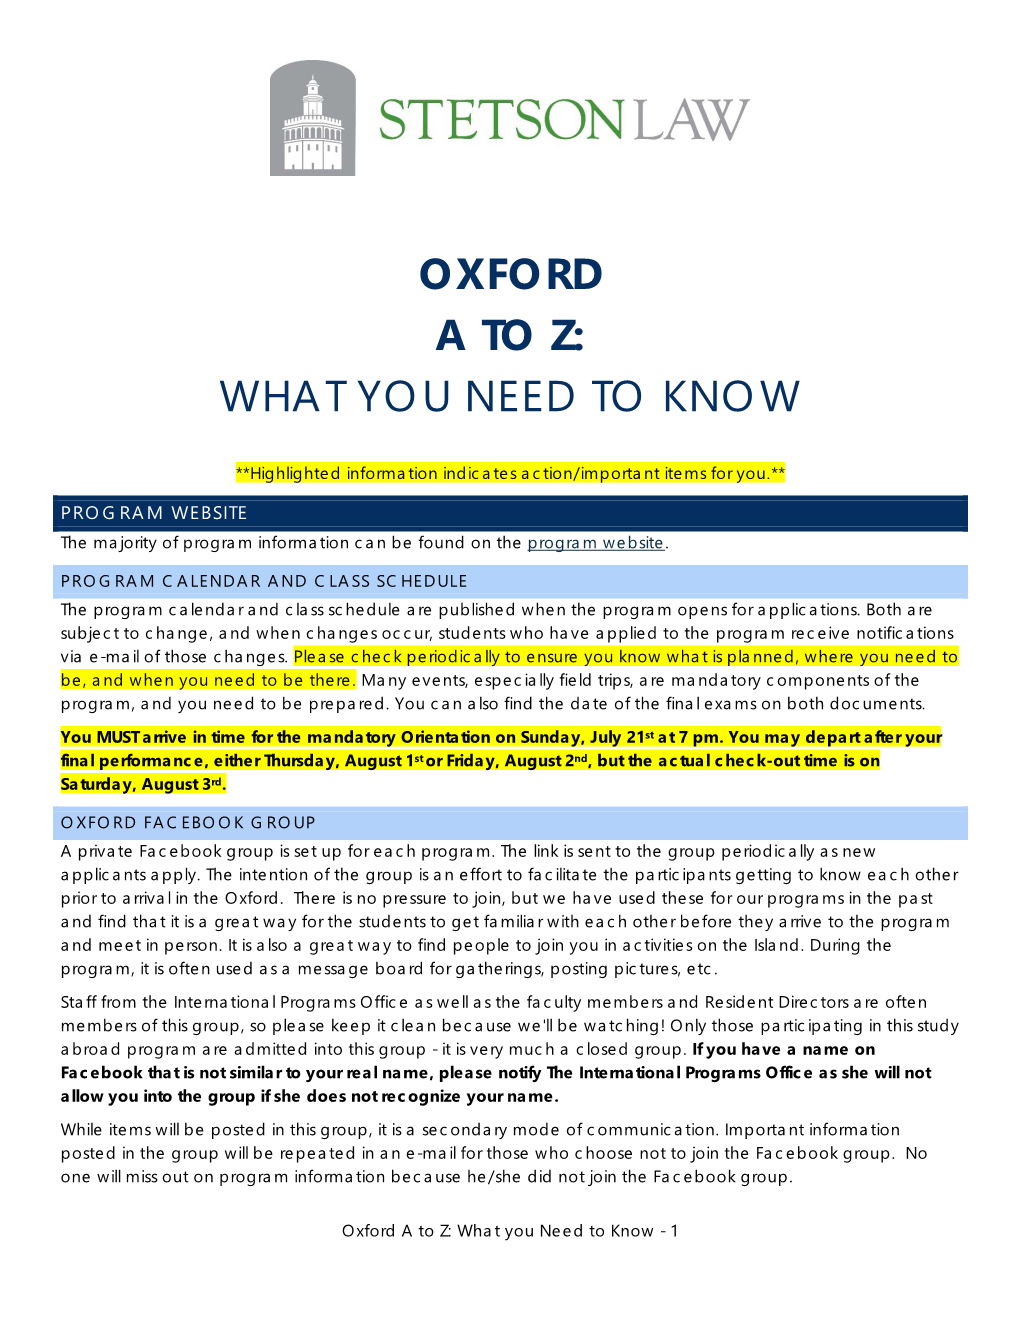 Oxford a to Z: What You Need to Know